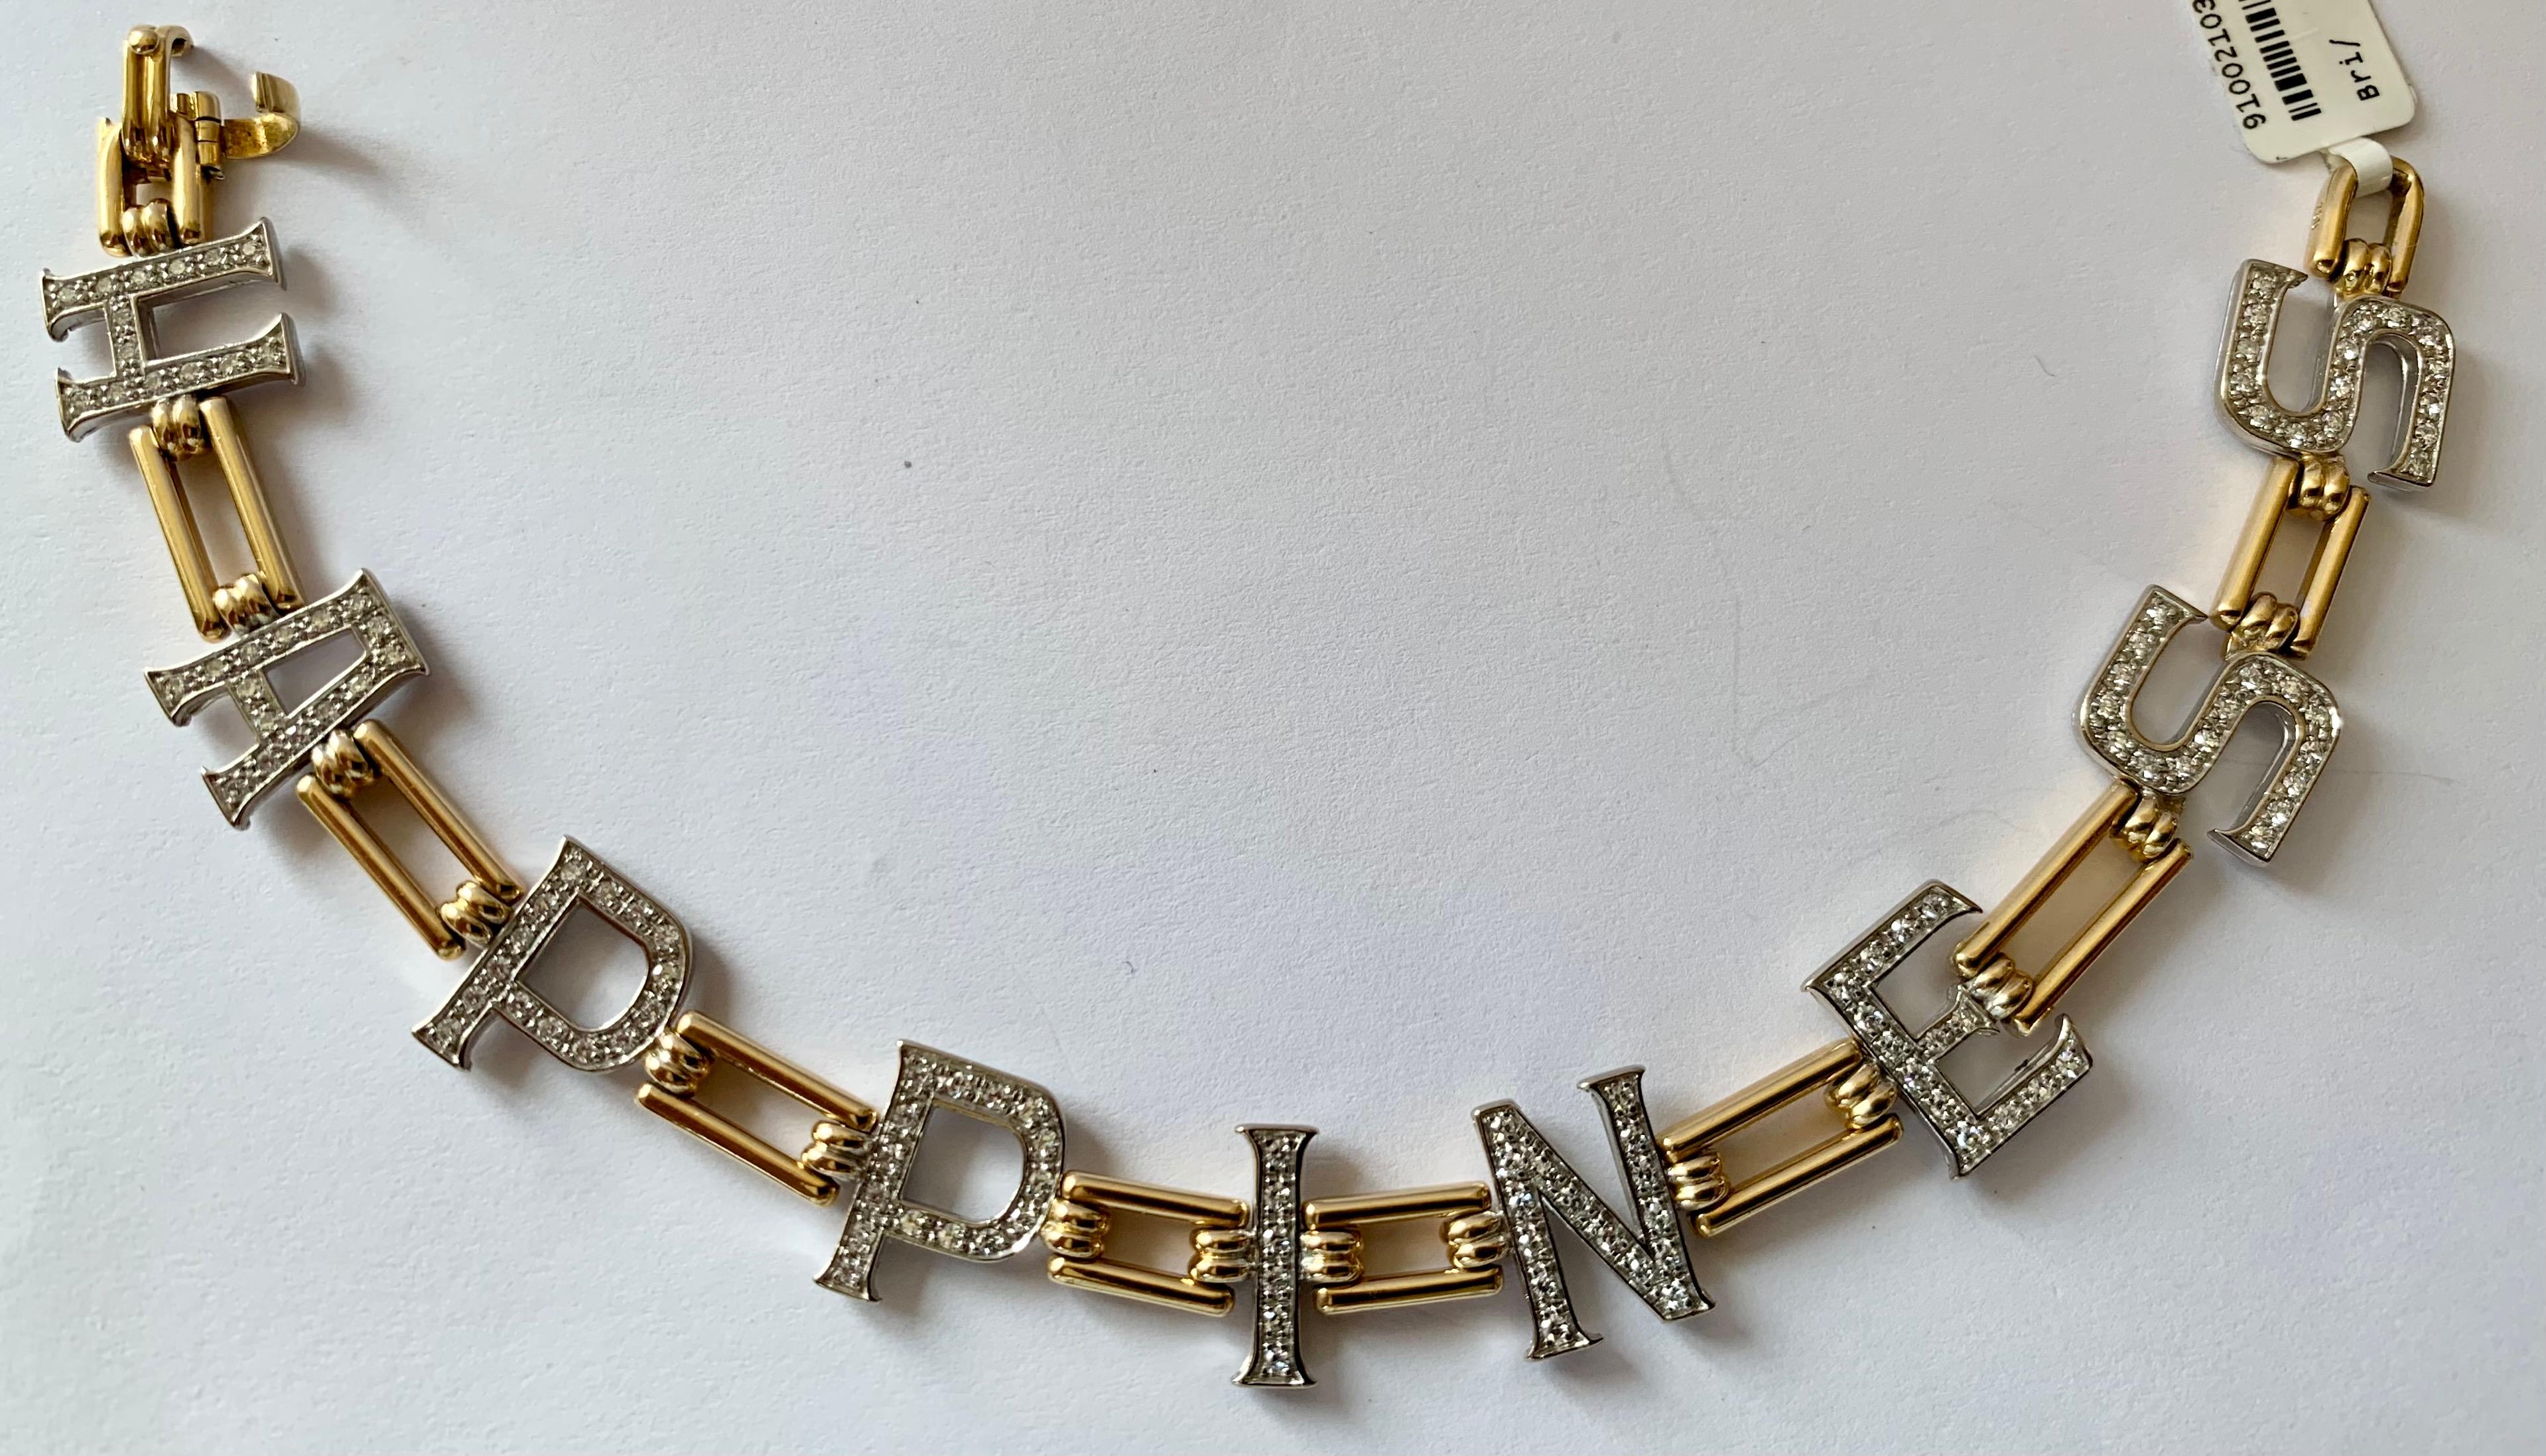 A darling bracelet: Diamond cut-out letters spell out 